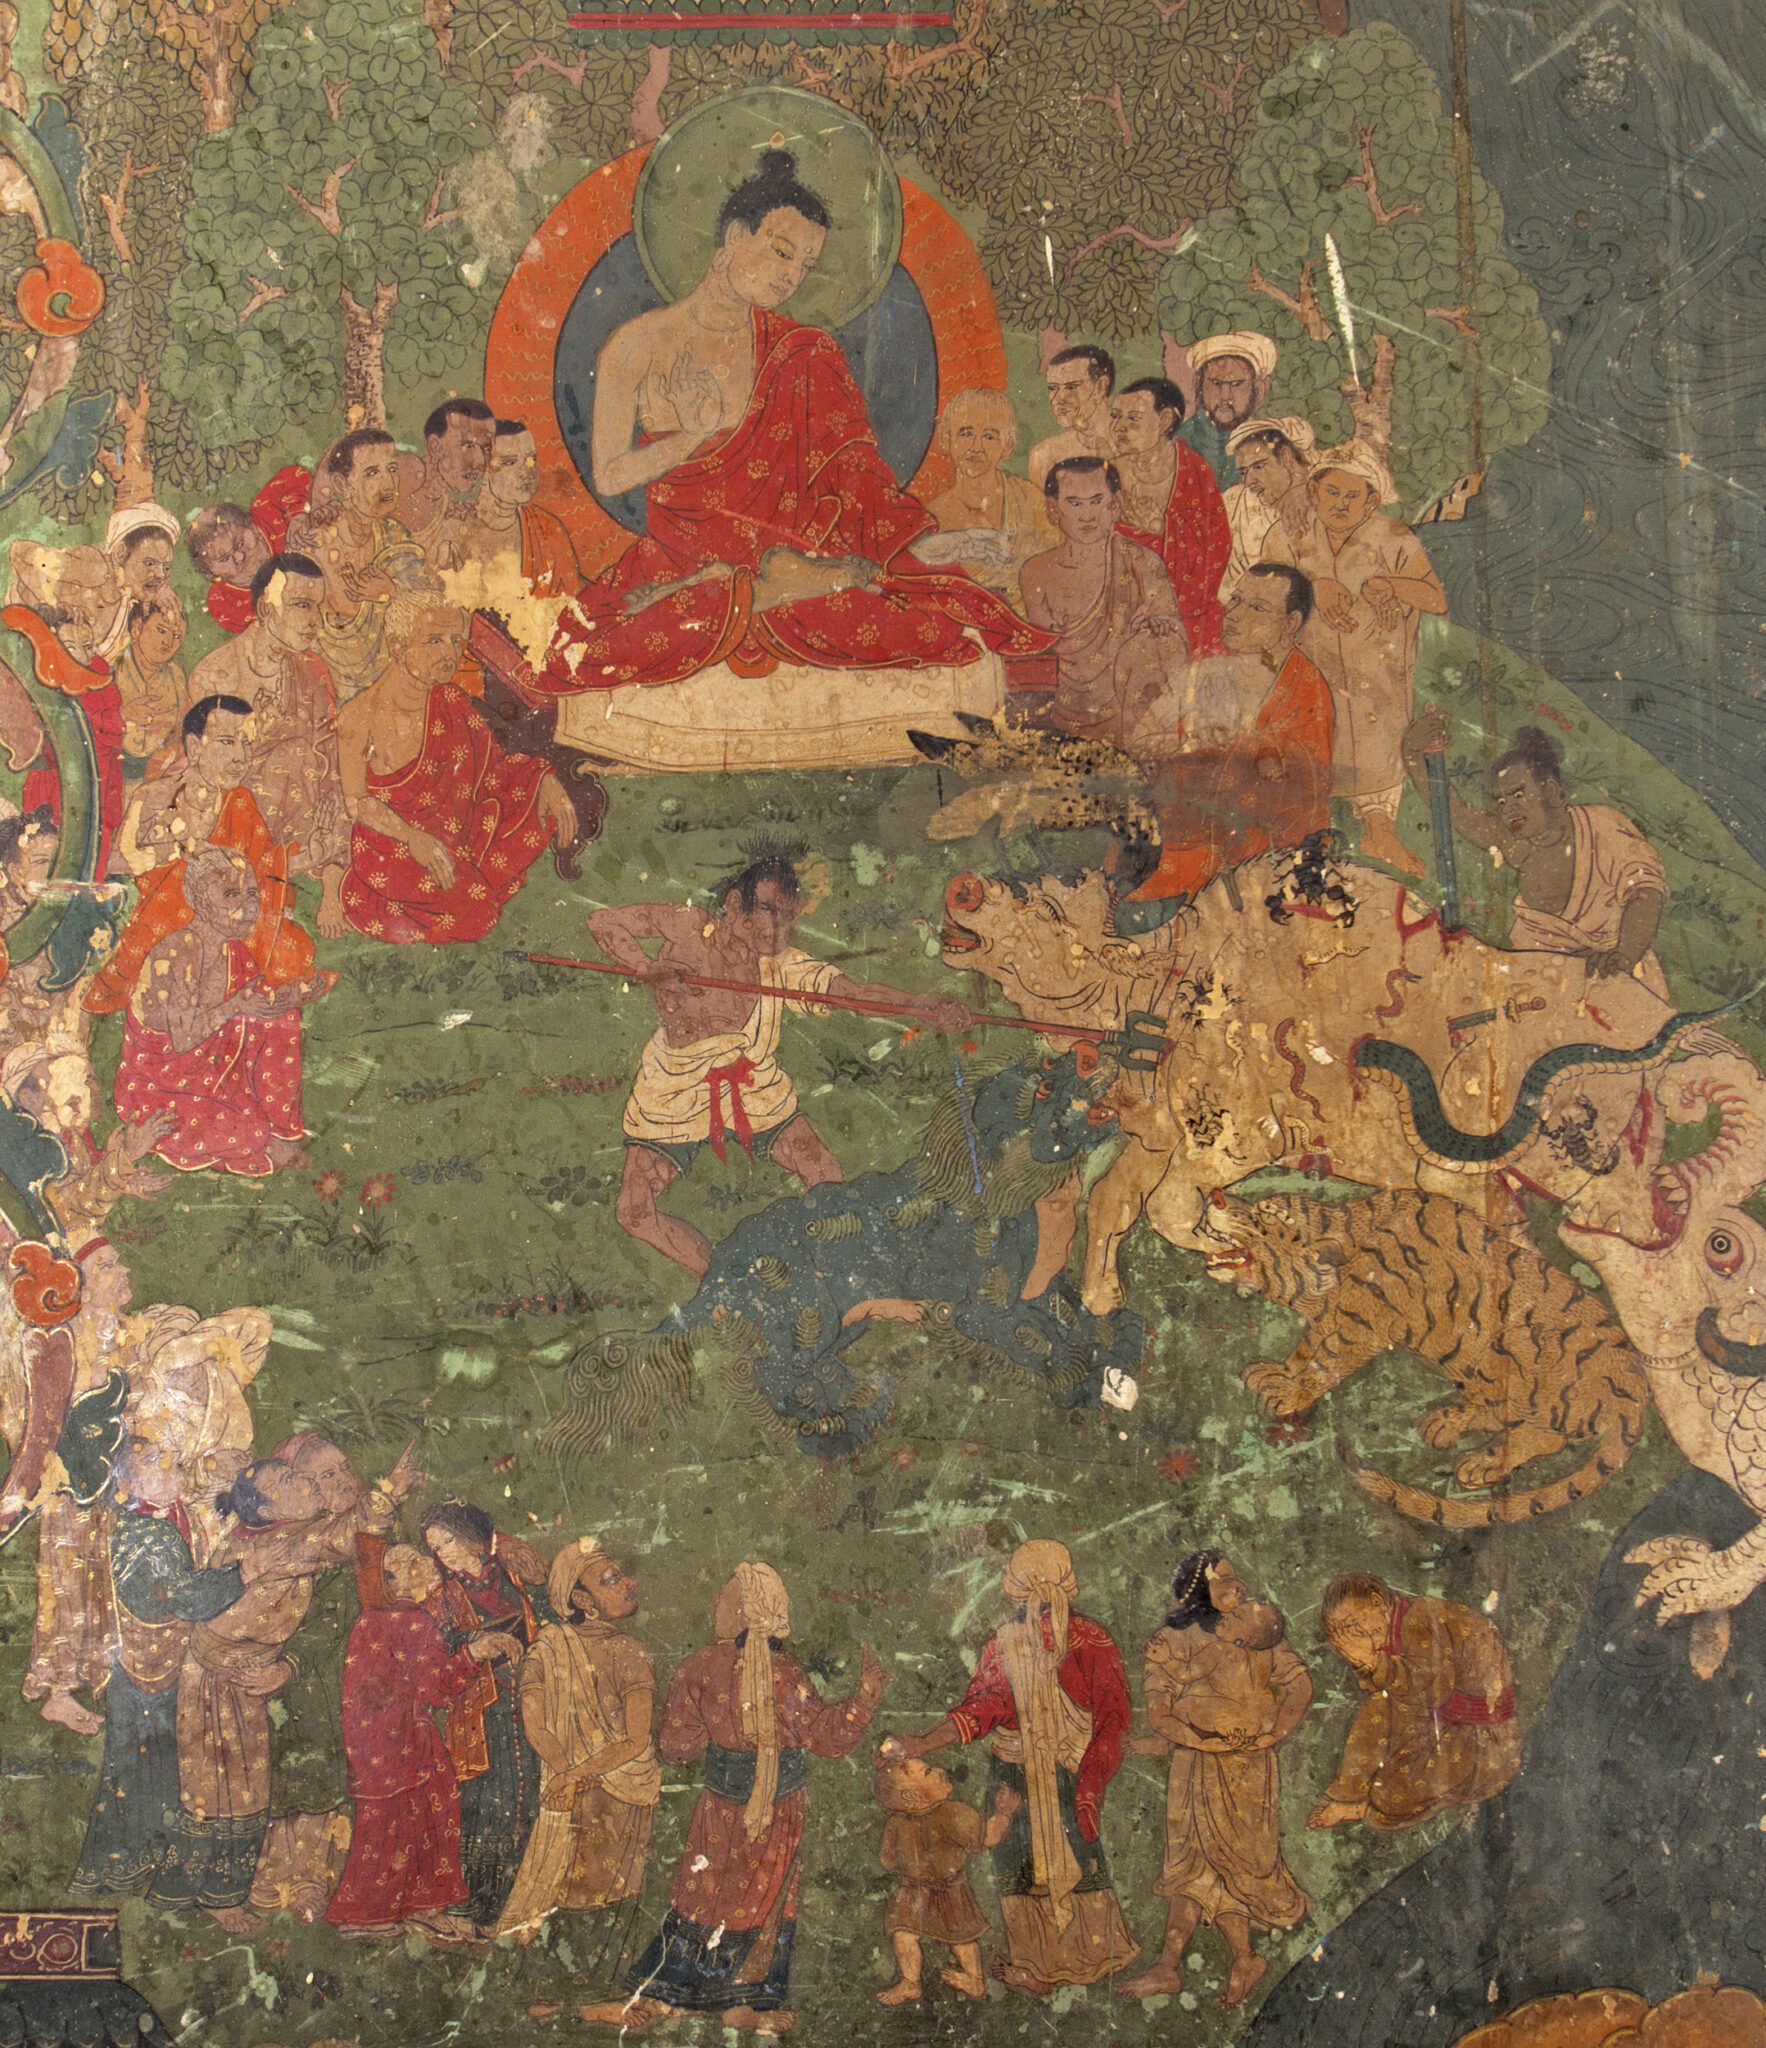 Seated Buddha and attendants assembled in circle look upon beasts being slain by two figures